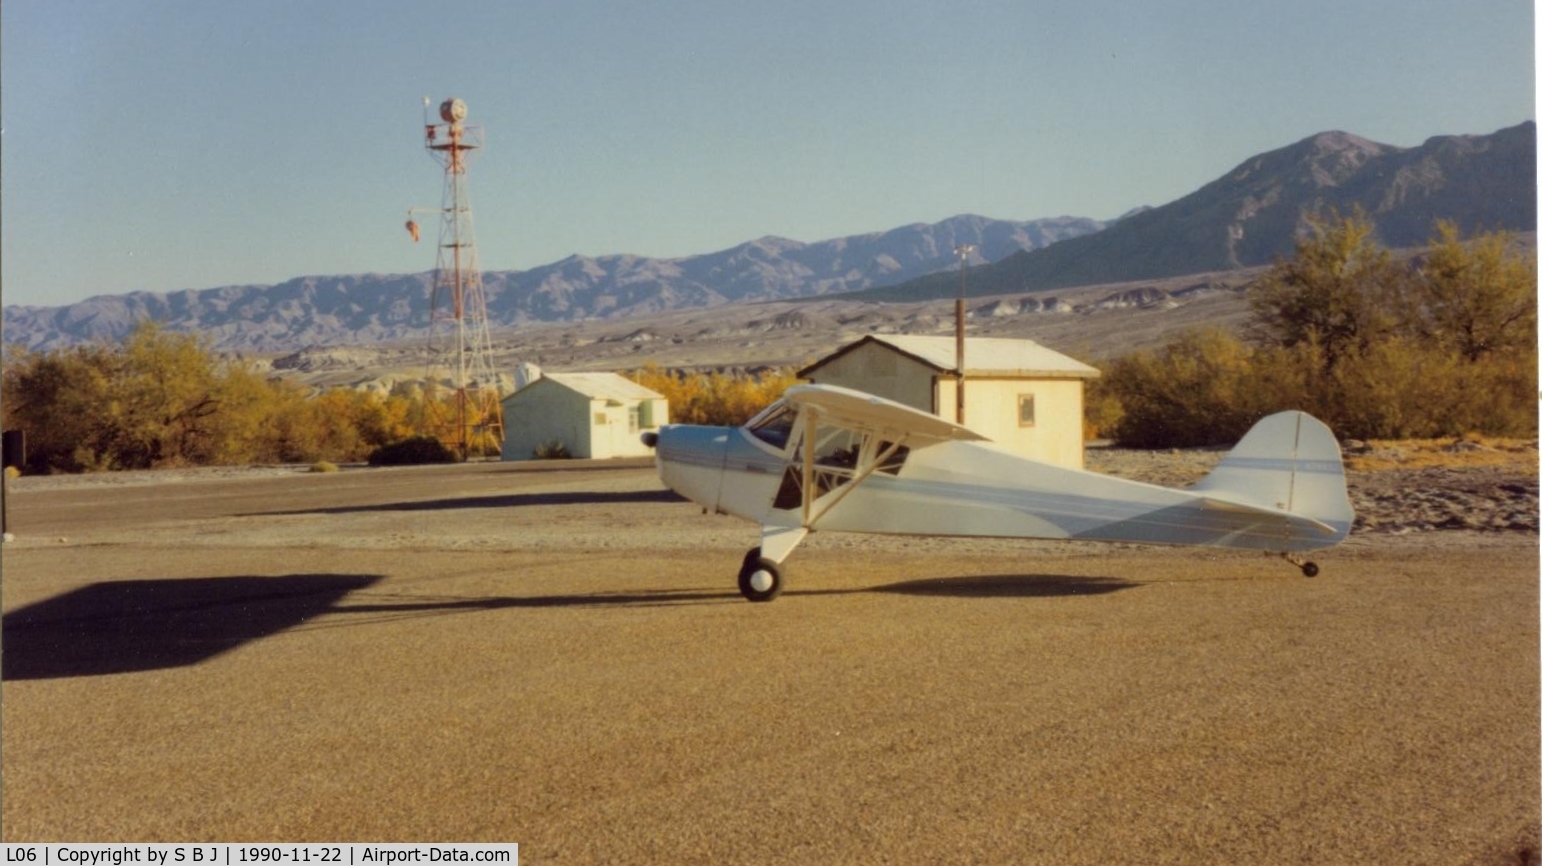 Furnace Creek Airport (L06) - 932 in Death Valley in 1990.